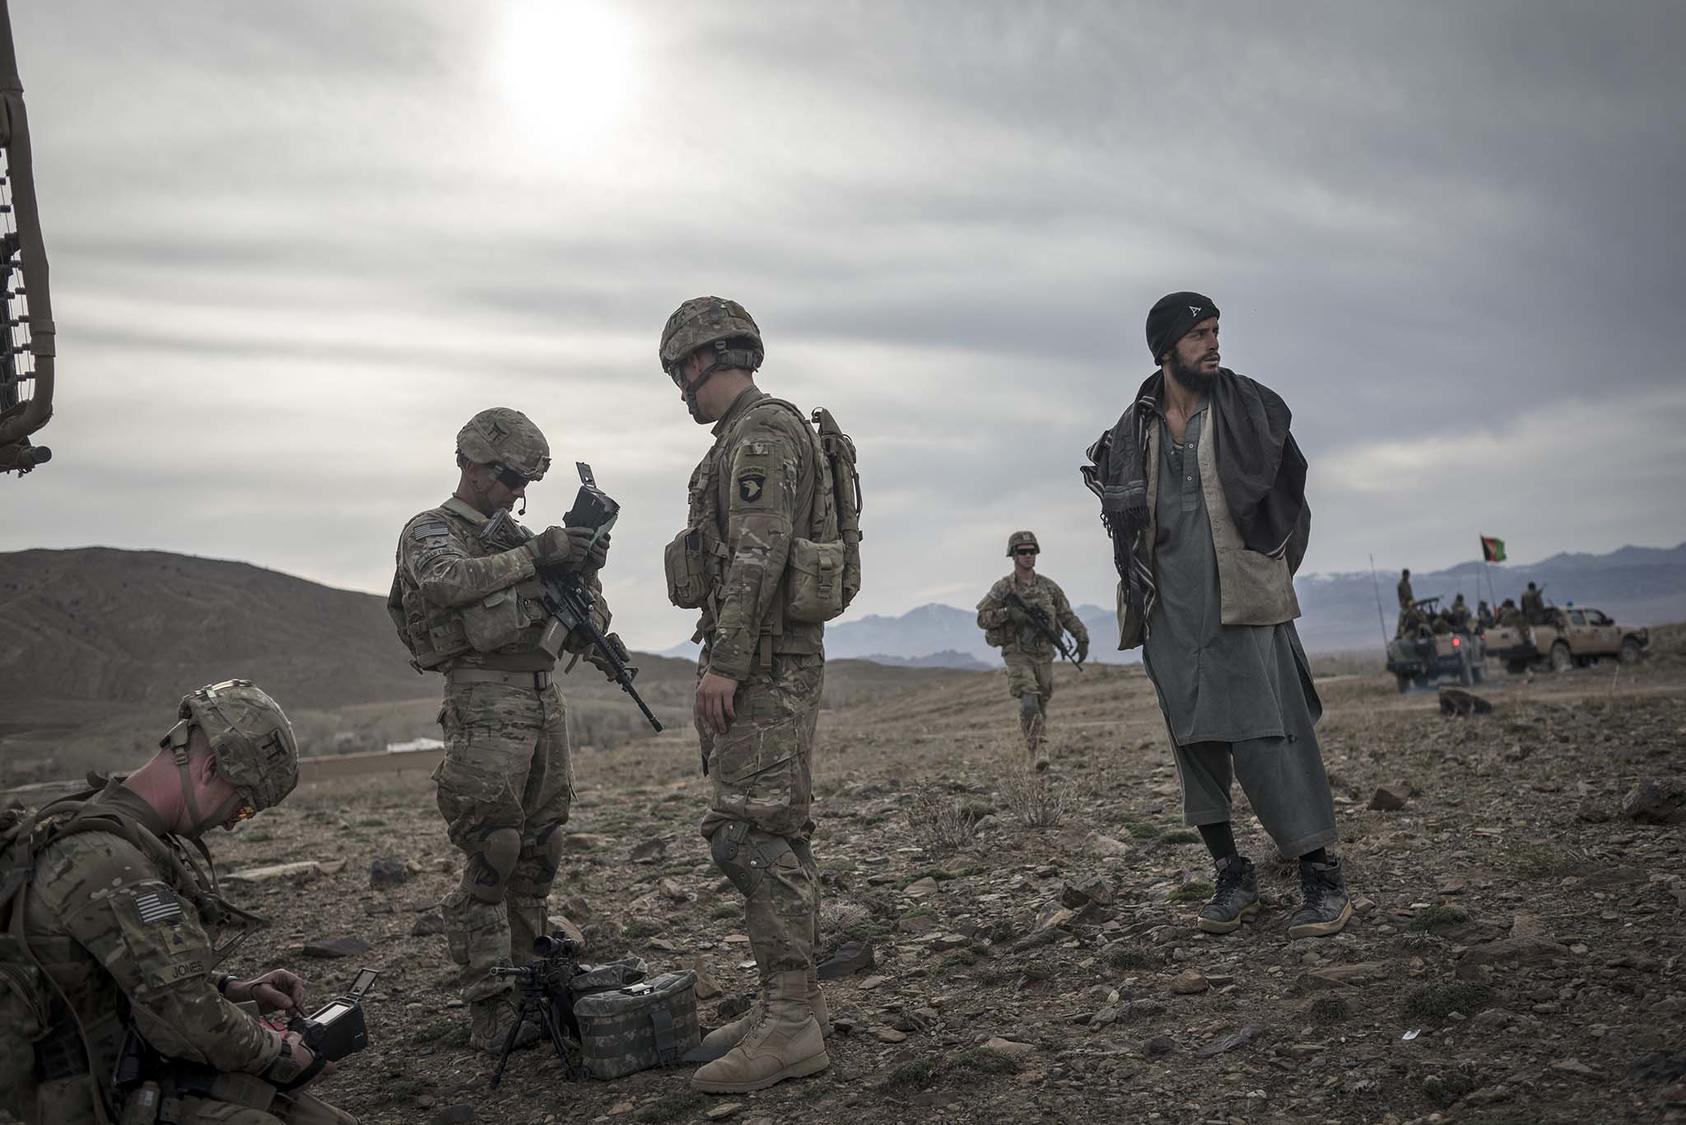 Soldiers from the 101st Airborne Division stand next to an Afghan suspected of Taliban connections in Lakaray, Afghanistan, April 14, 2013. (Sergey Ponomarev/The New York Times)